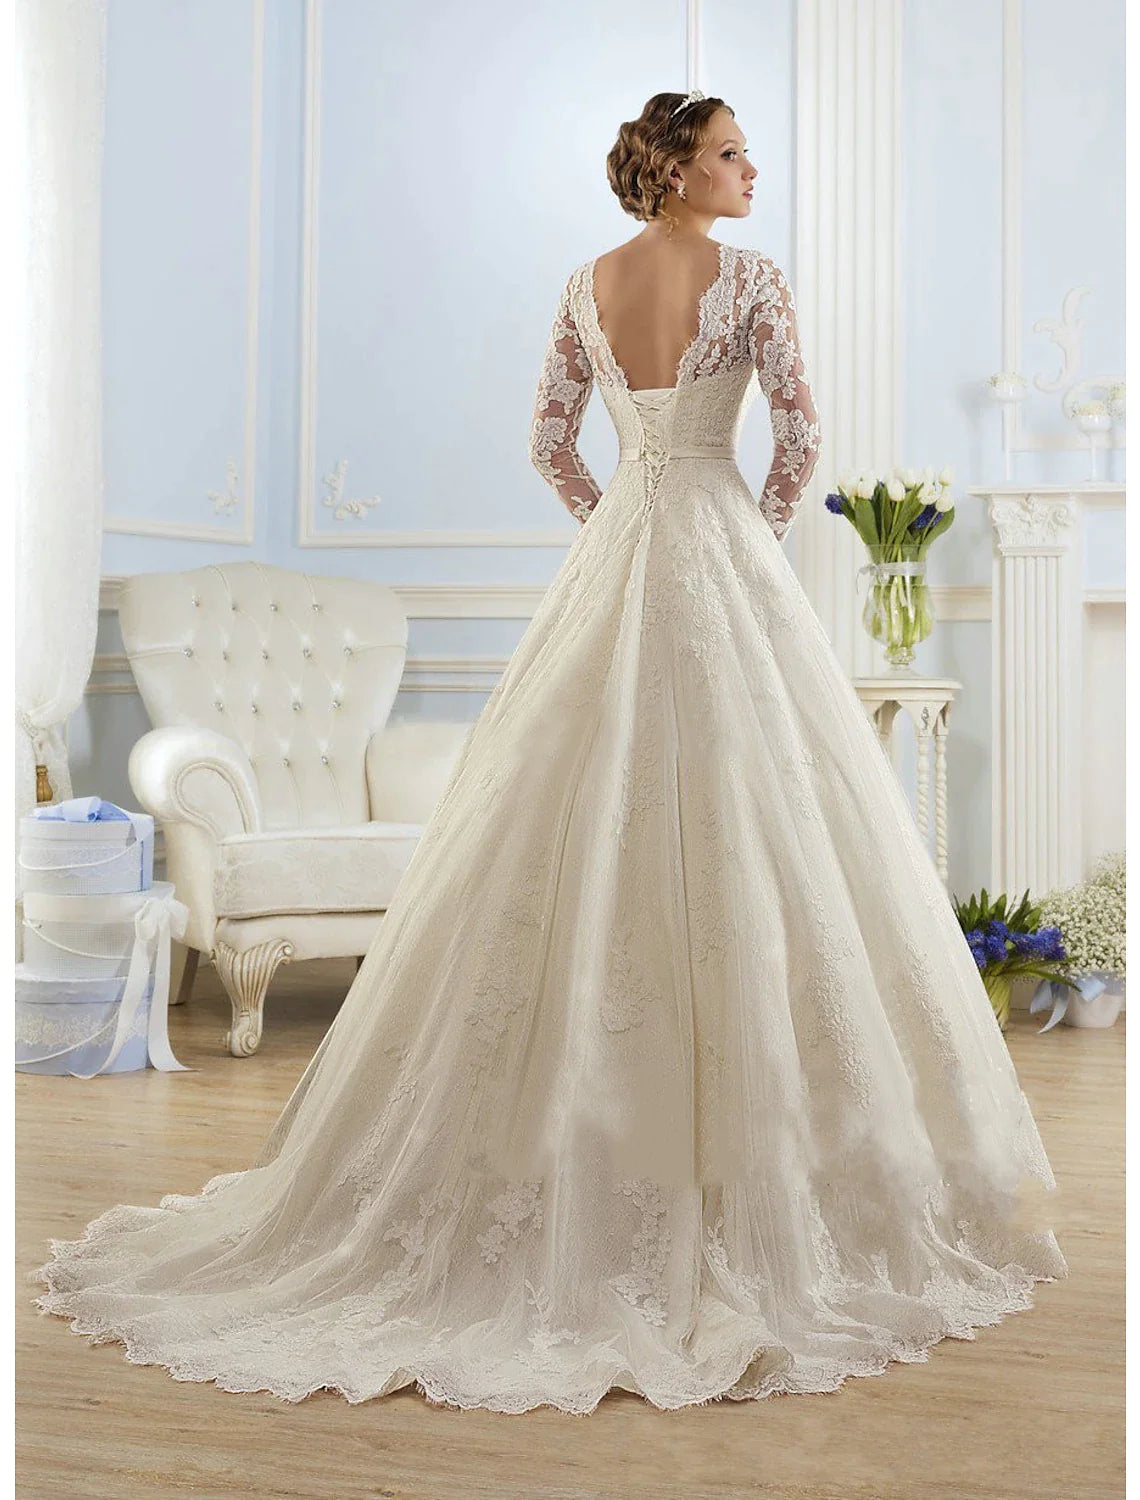 Engagement Formal Wedding Dresses A-Line Long Sleeve with Lace